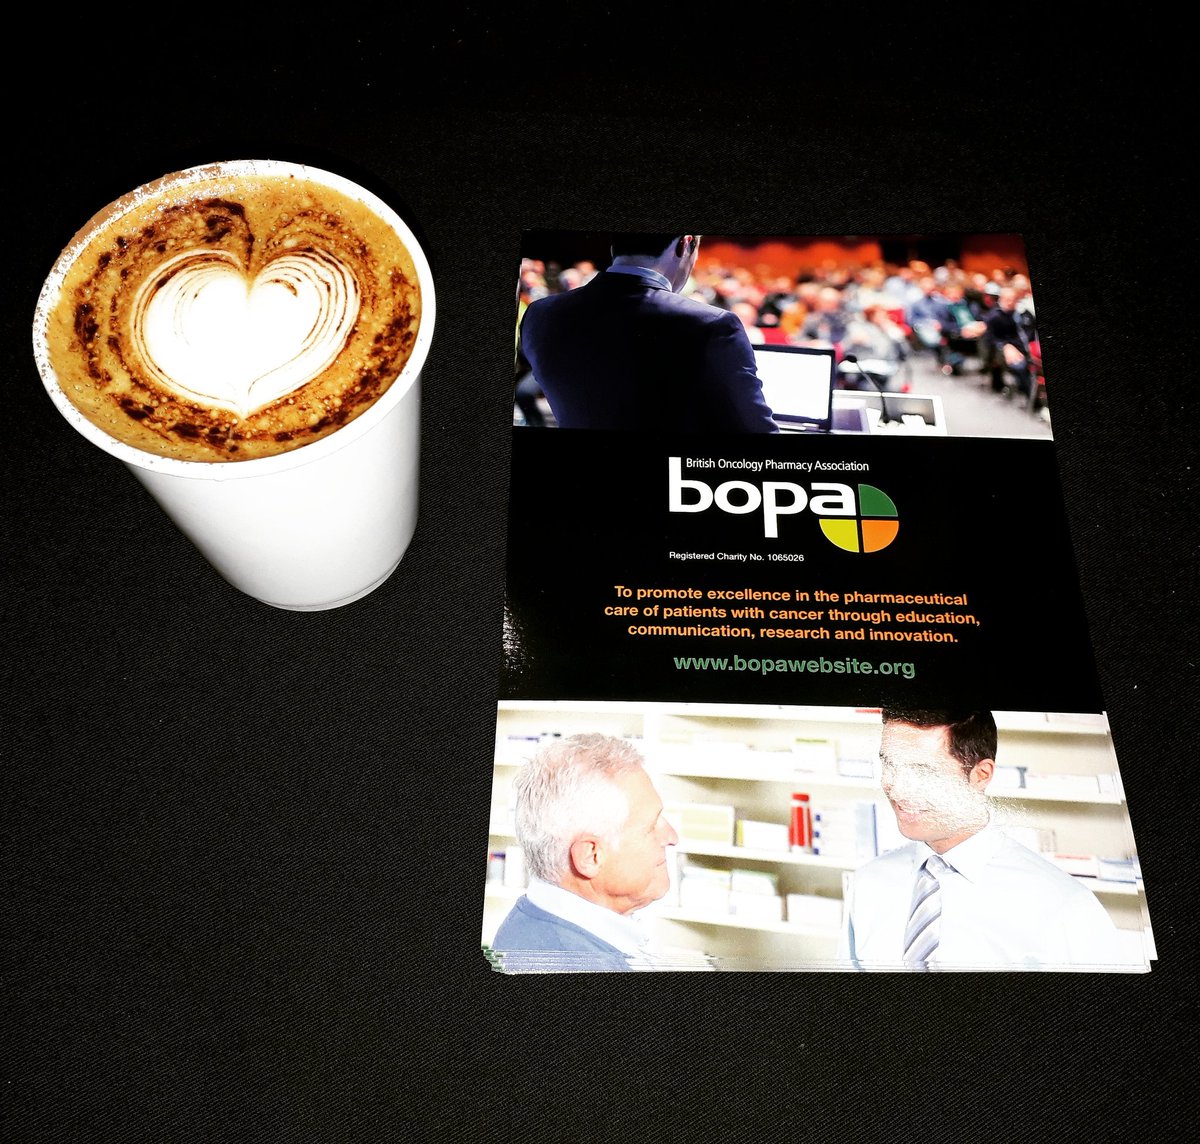 Day 2 of the BOPA Annual Symposium at the ICC.
#eventcoffee 
#conferencecoffee 
#latteart
#cappuccino 
#birmingham 
#specialitycoffee